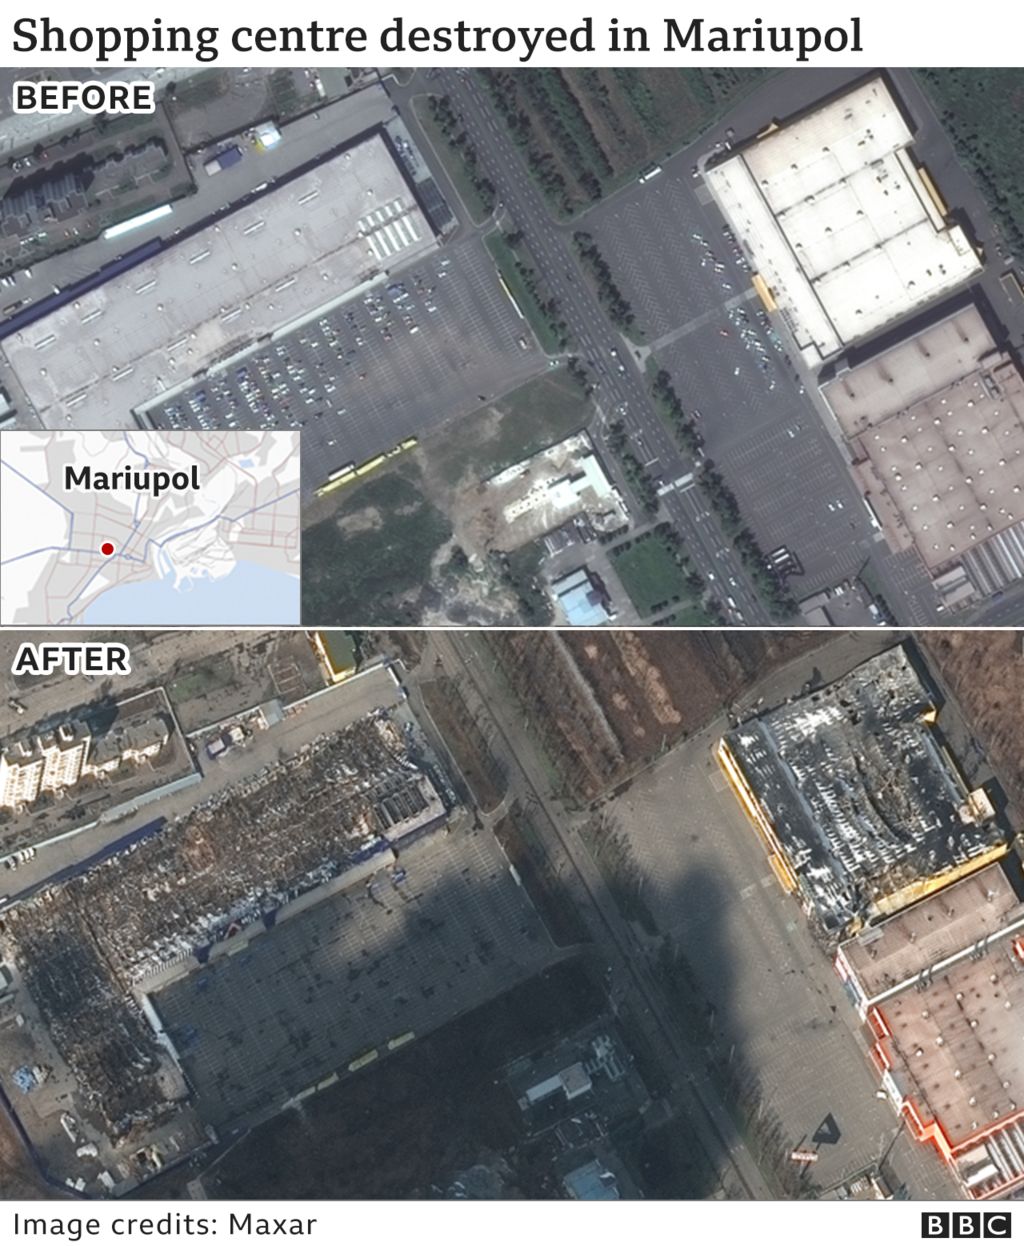 Satellite images showing damage to a shopping centre in Mariupol